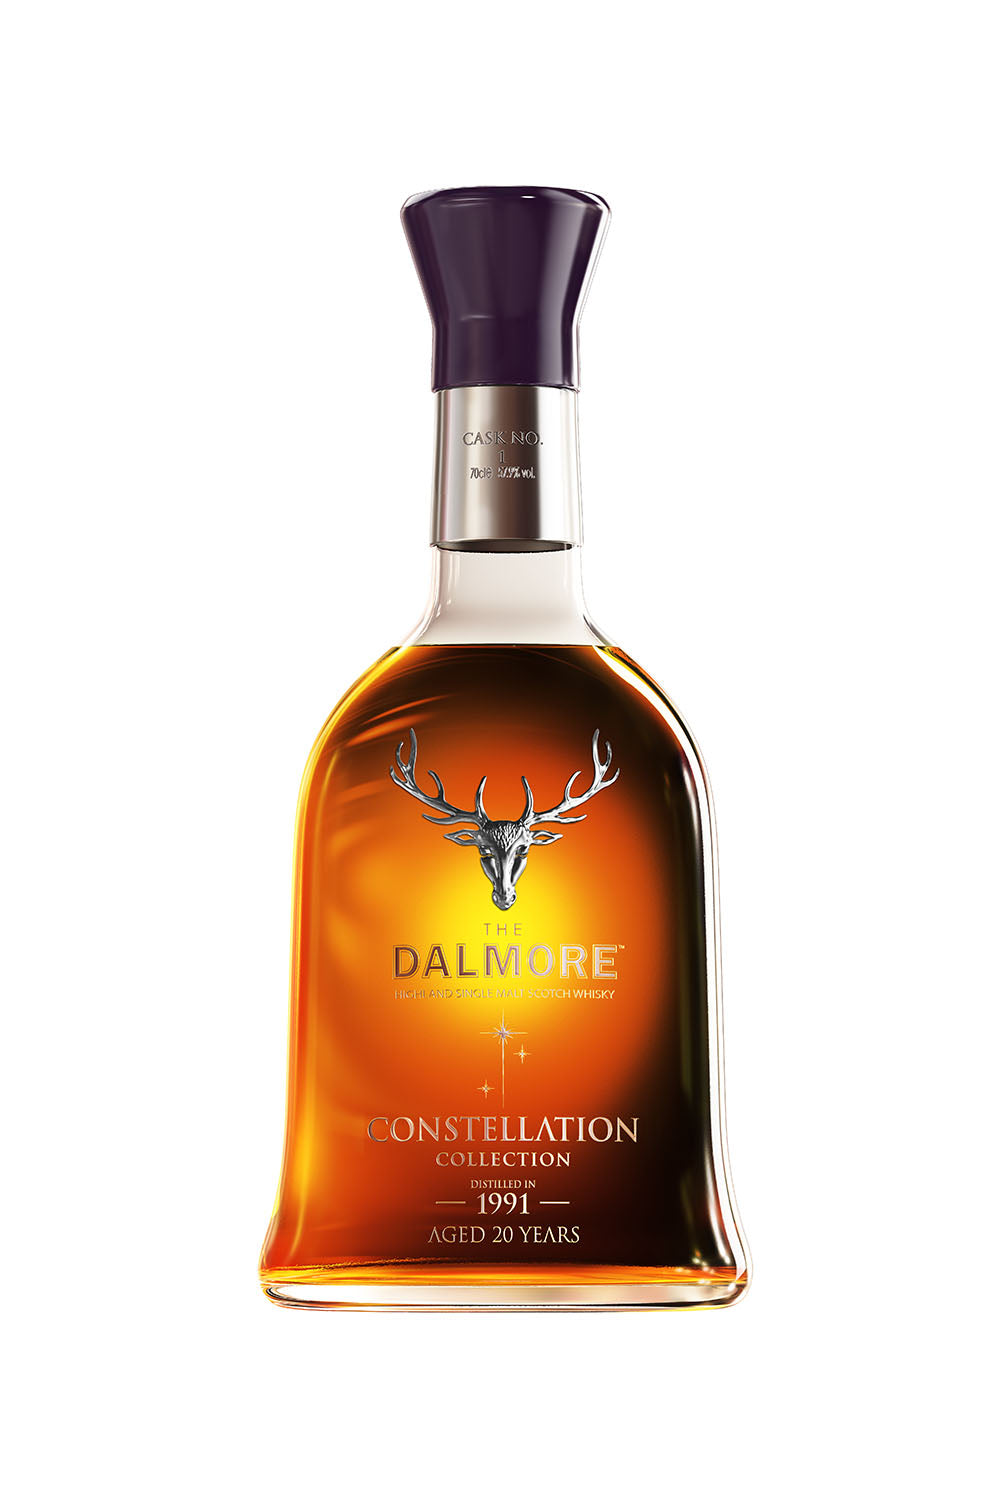 The Dalmore 1991 Constellation - Cask 1